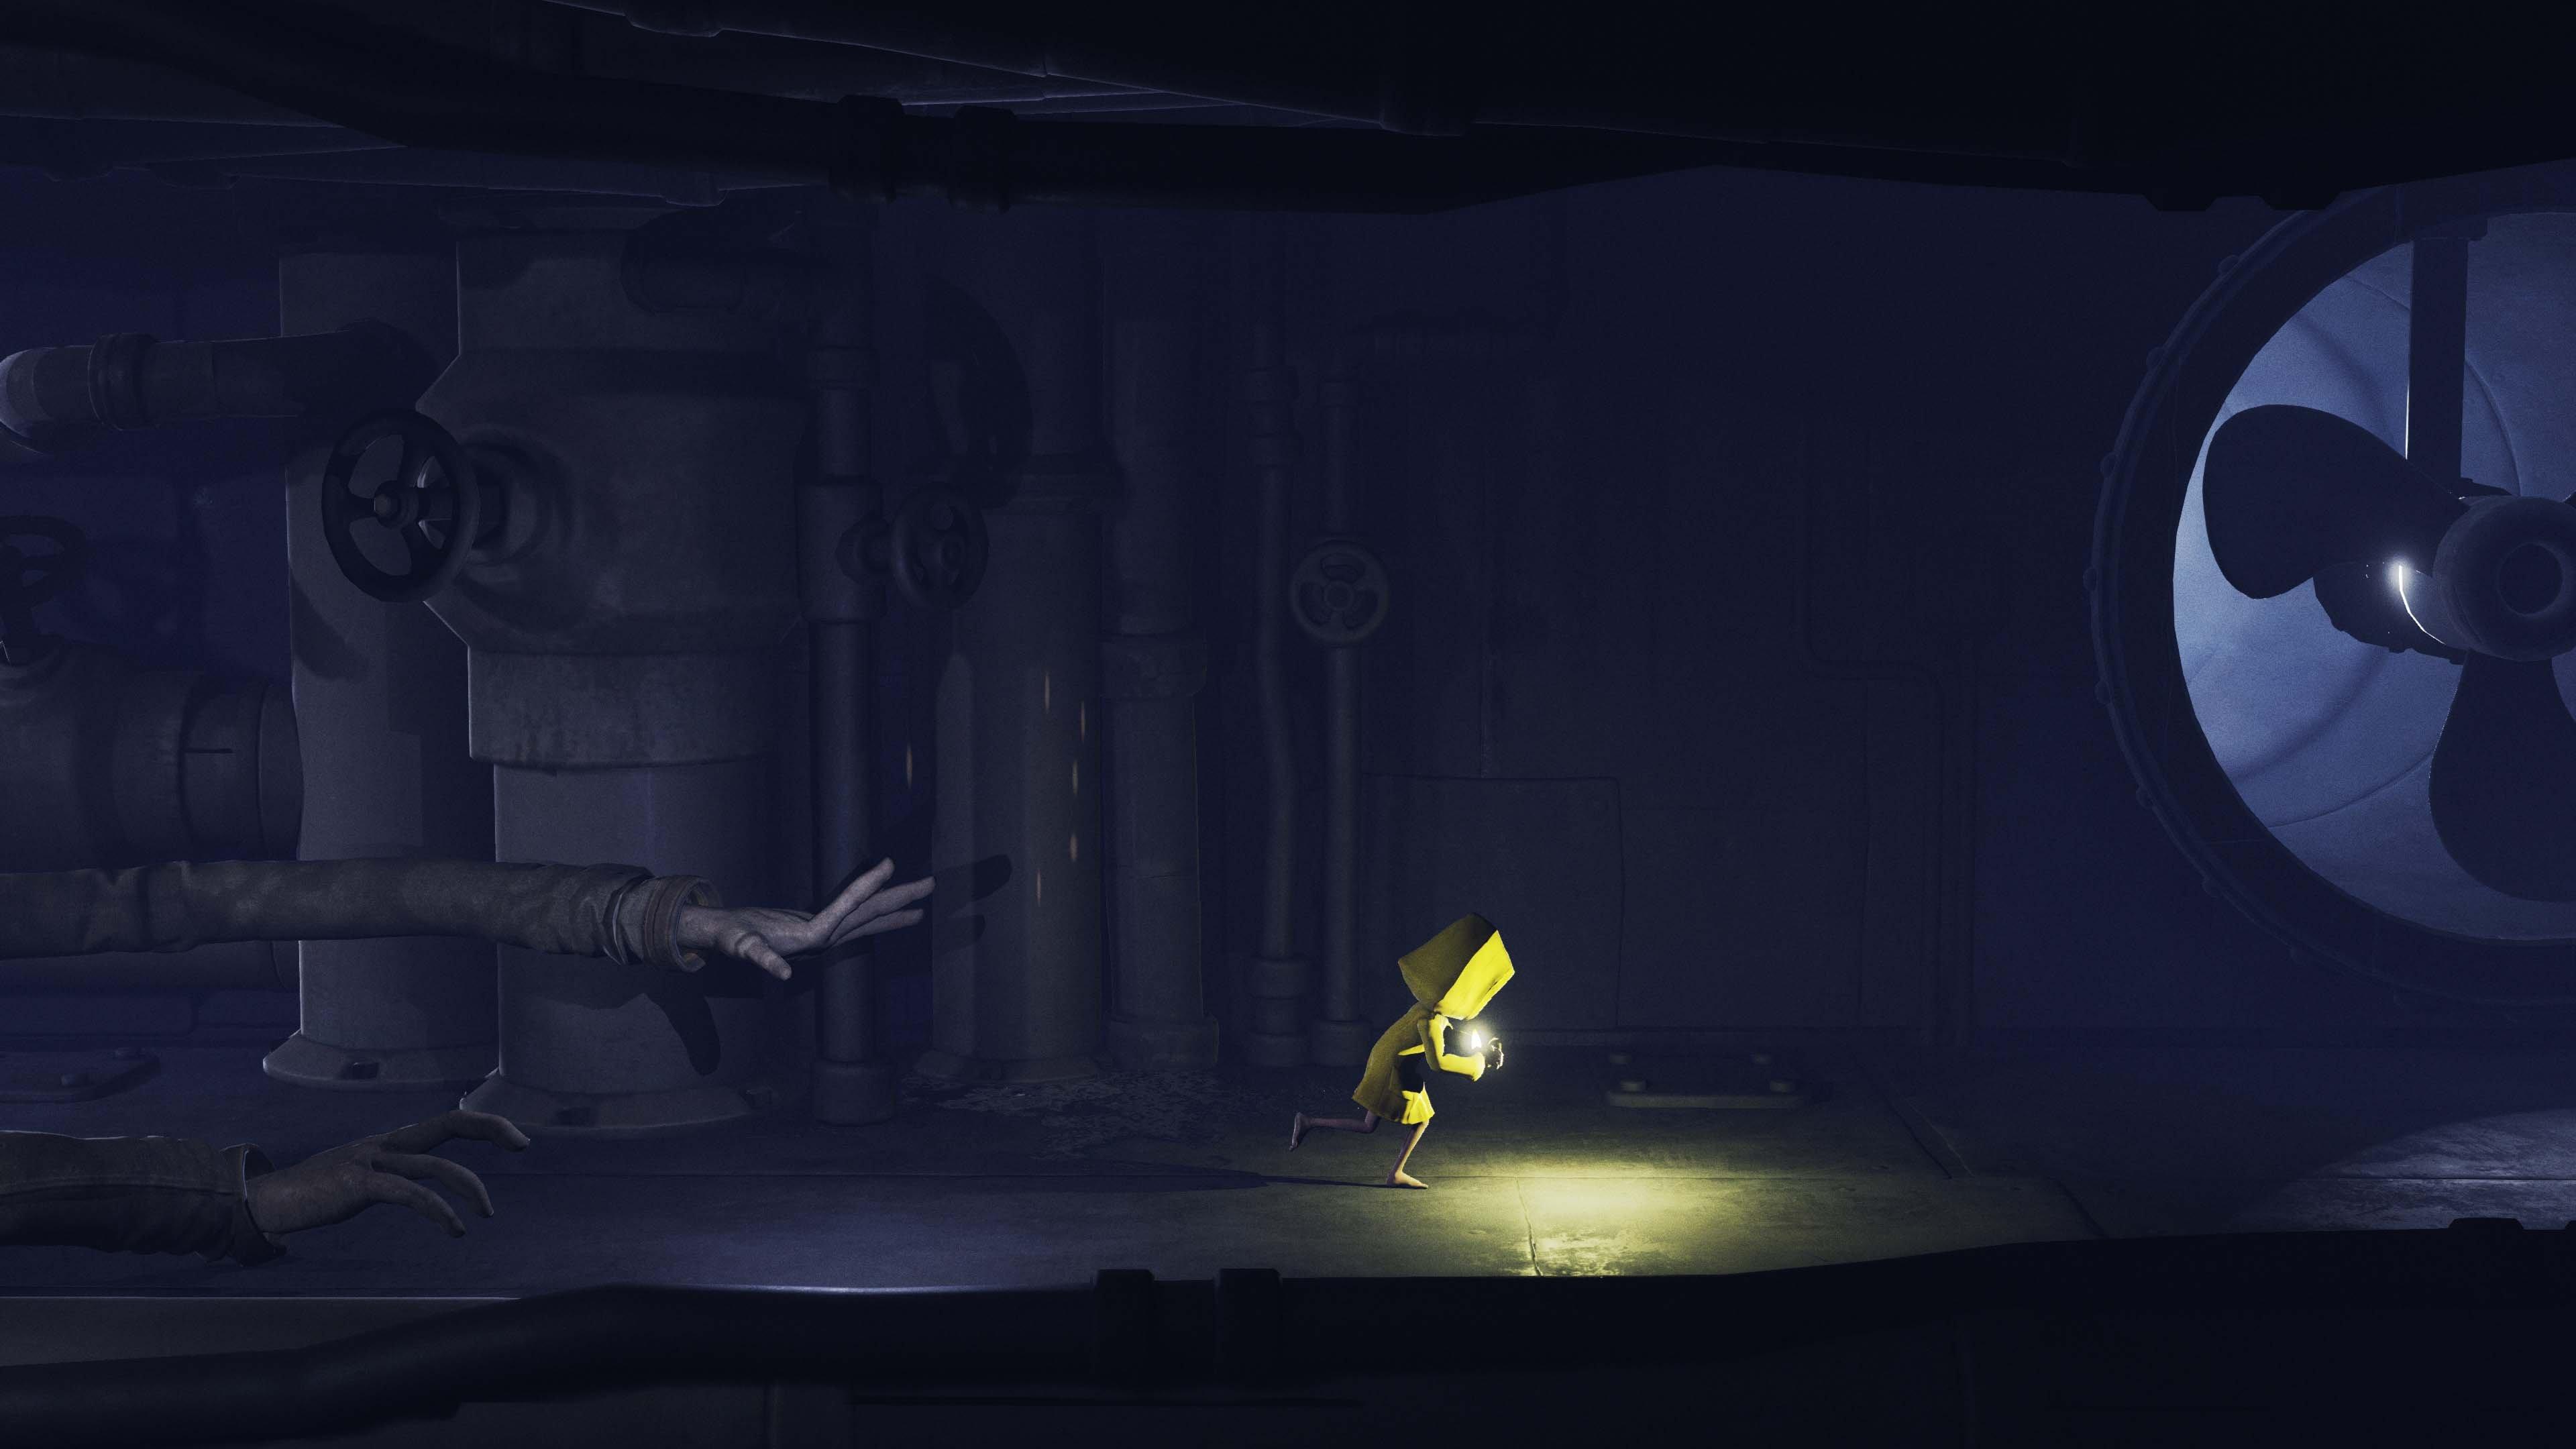  Little Nightmares Complete Edition (Nintendo Switch) : Video  Games